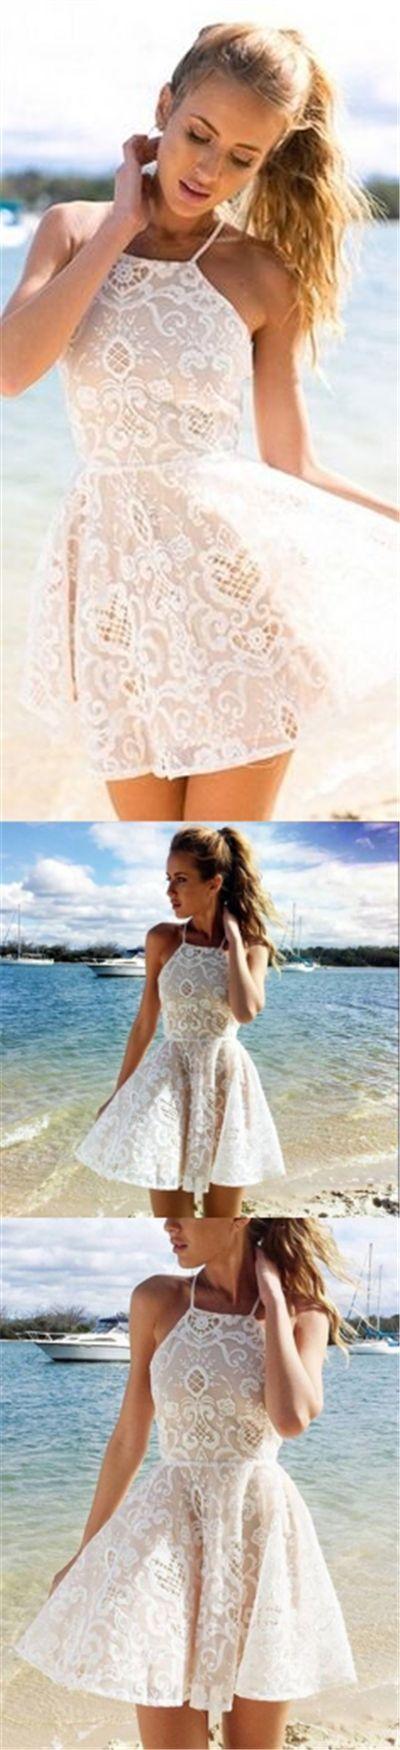 Mariage - 2017 Homecoming Dress Halter Lace Ivory Short Prom Dress Party Dress JK133